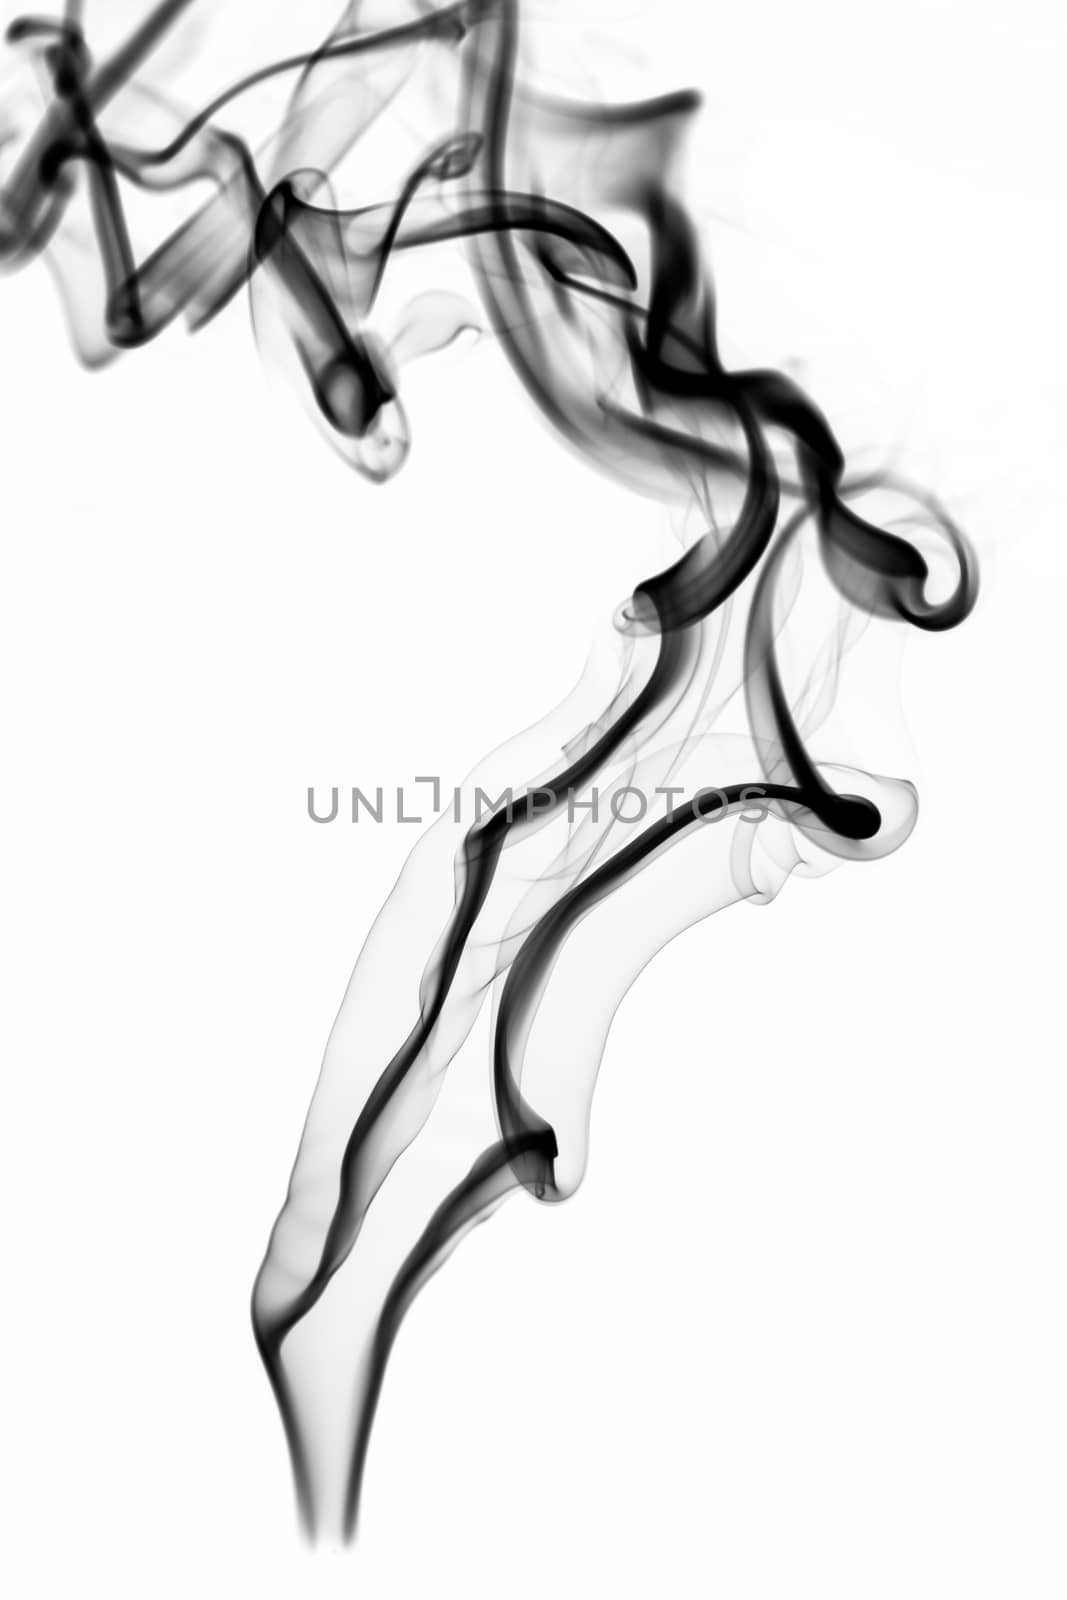 Abstraction: white smoke swirls over white background